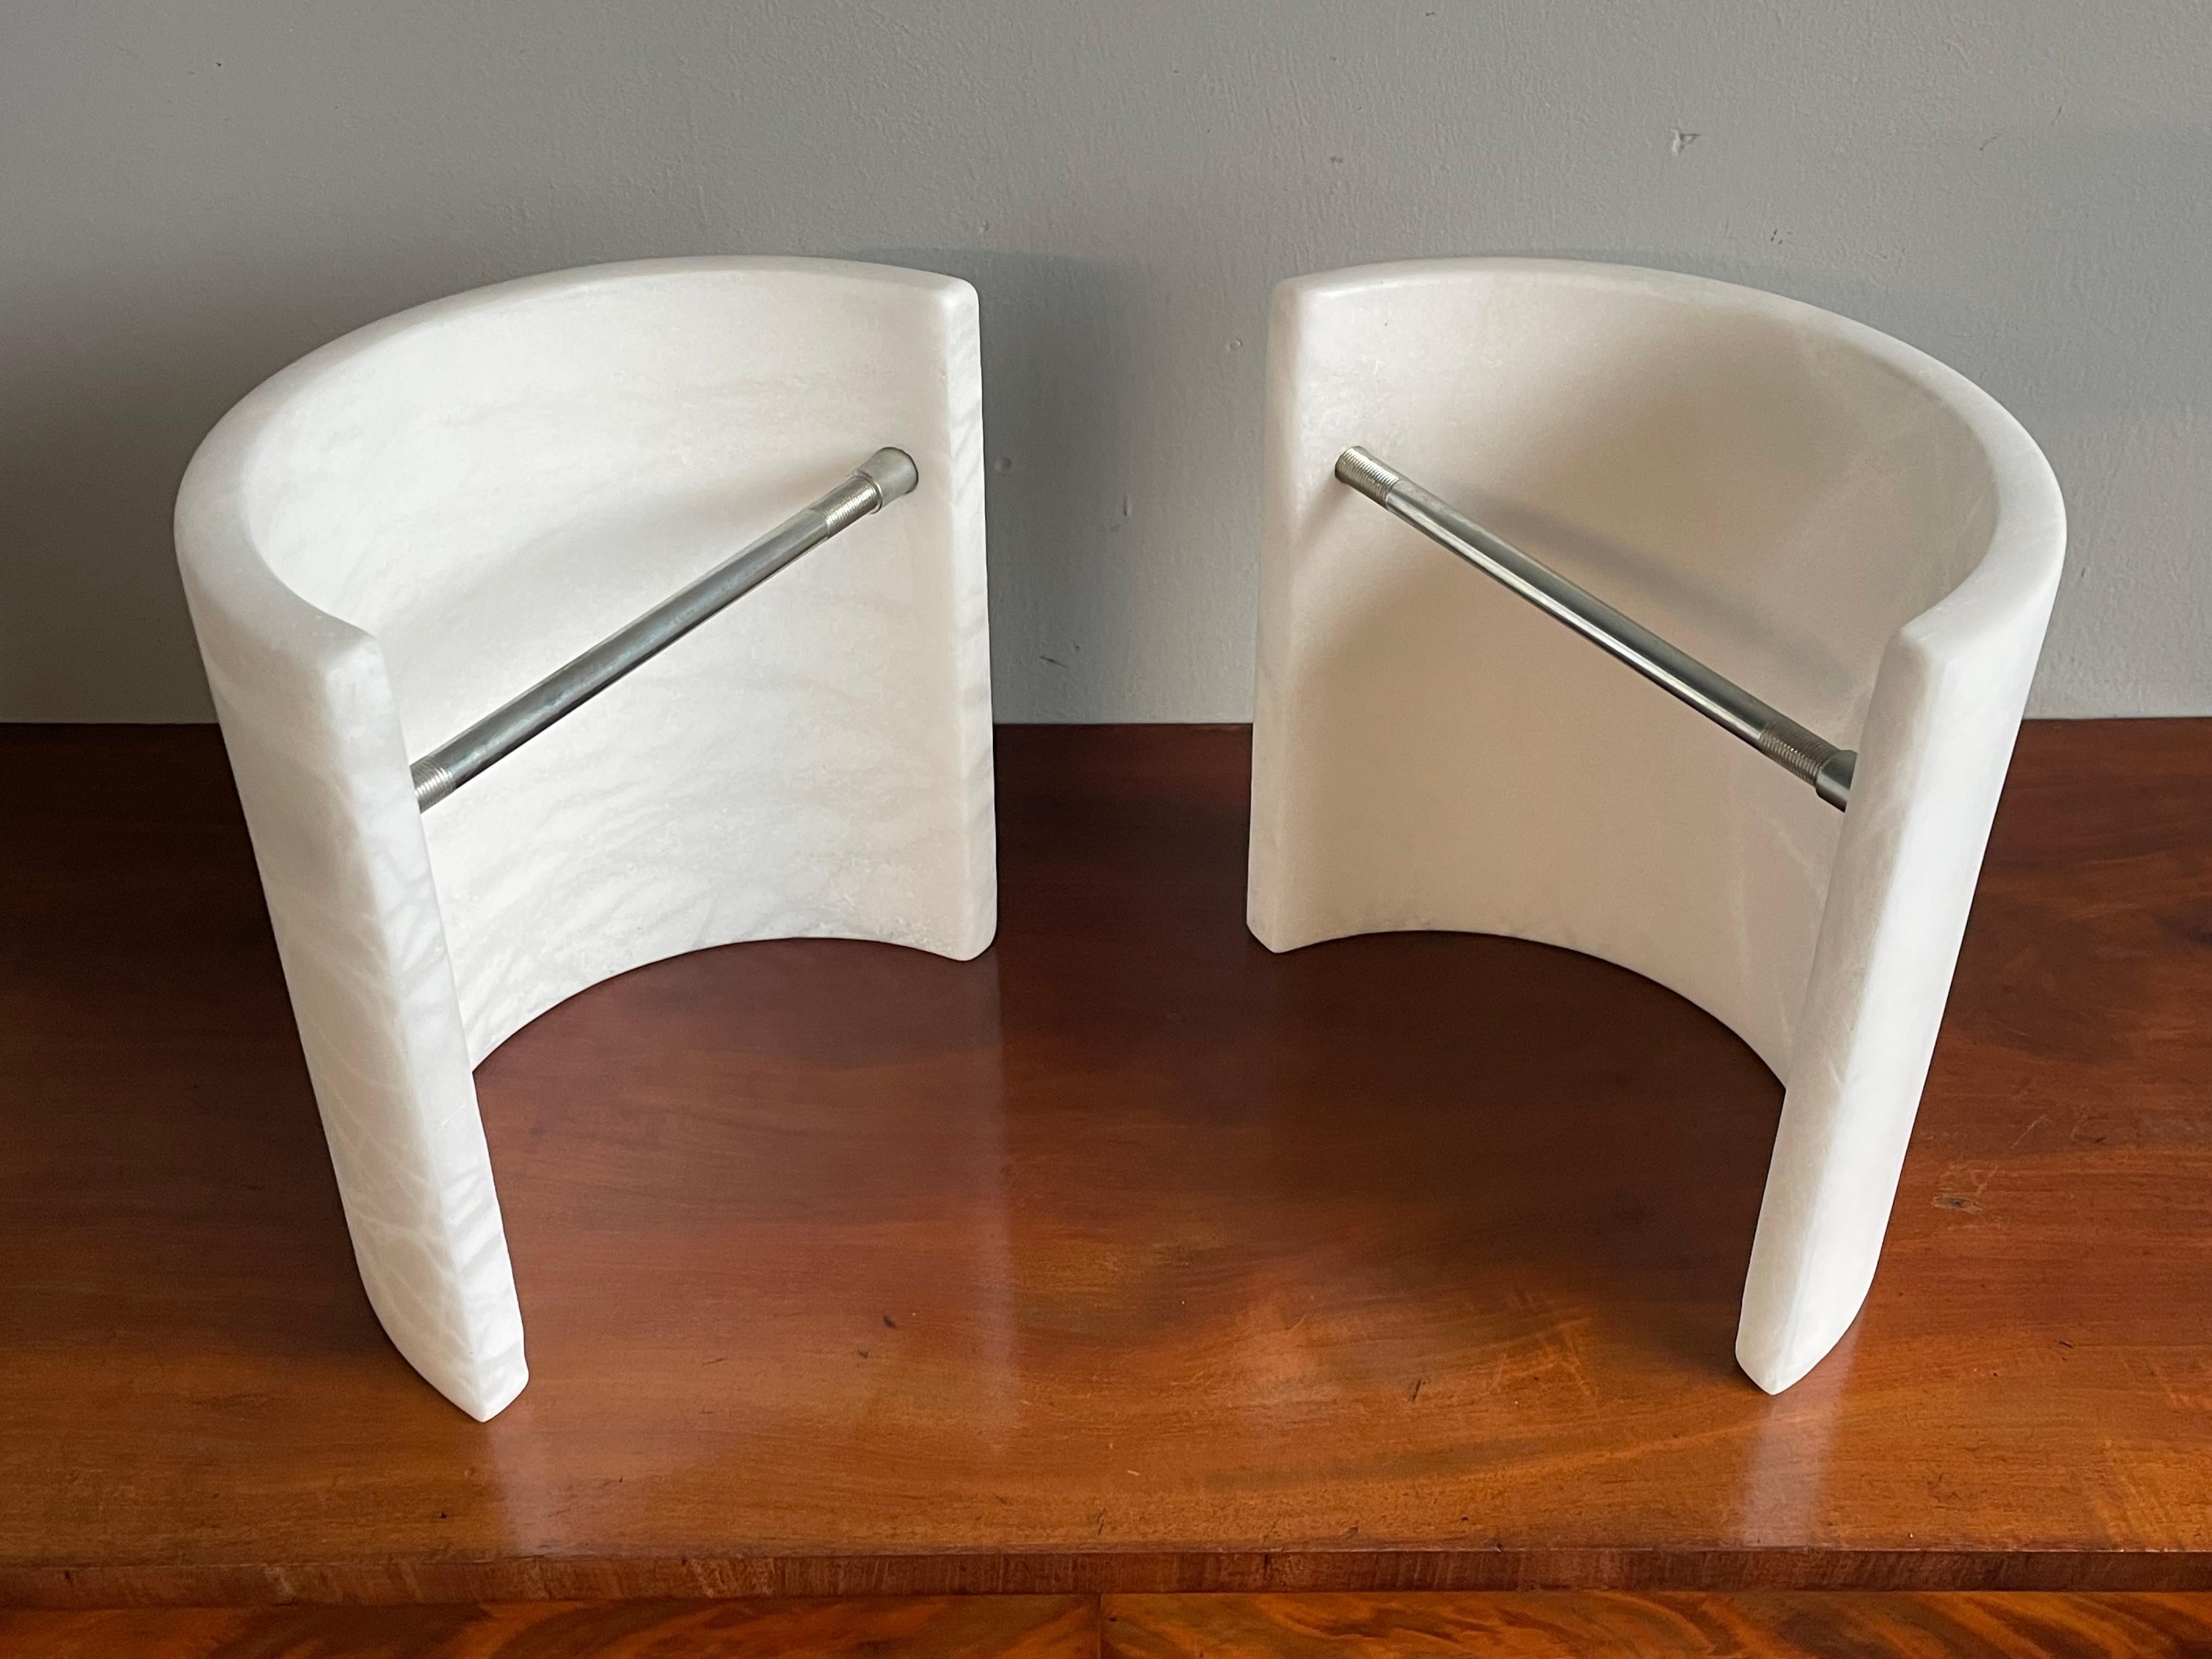 Aluminum Mint Pair of Art Deco Alabaster Up & Down Light Wall Sconces w. Stunning Veins For Sale